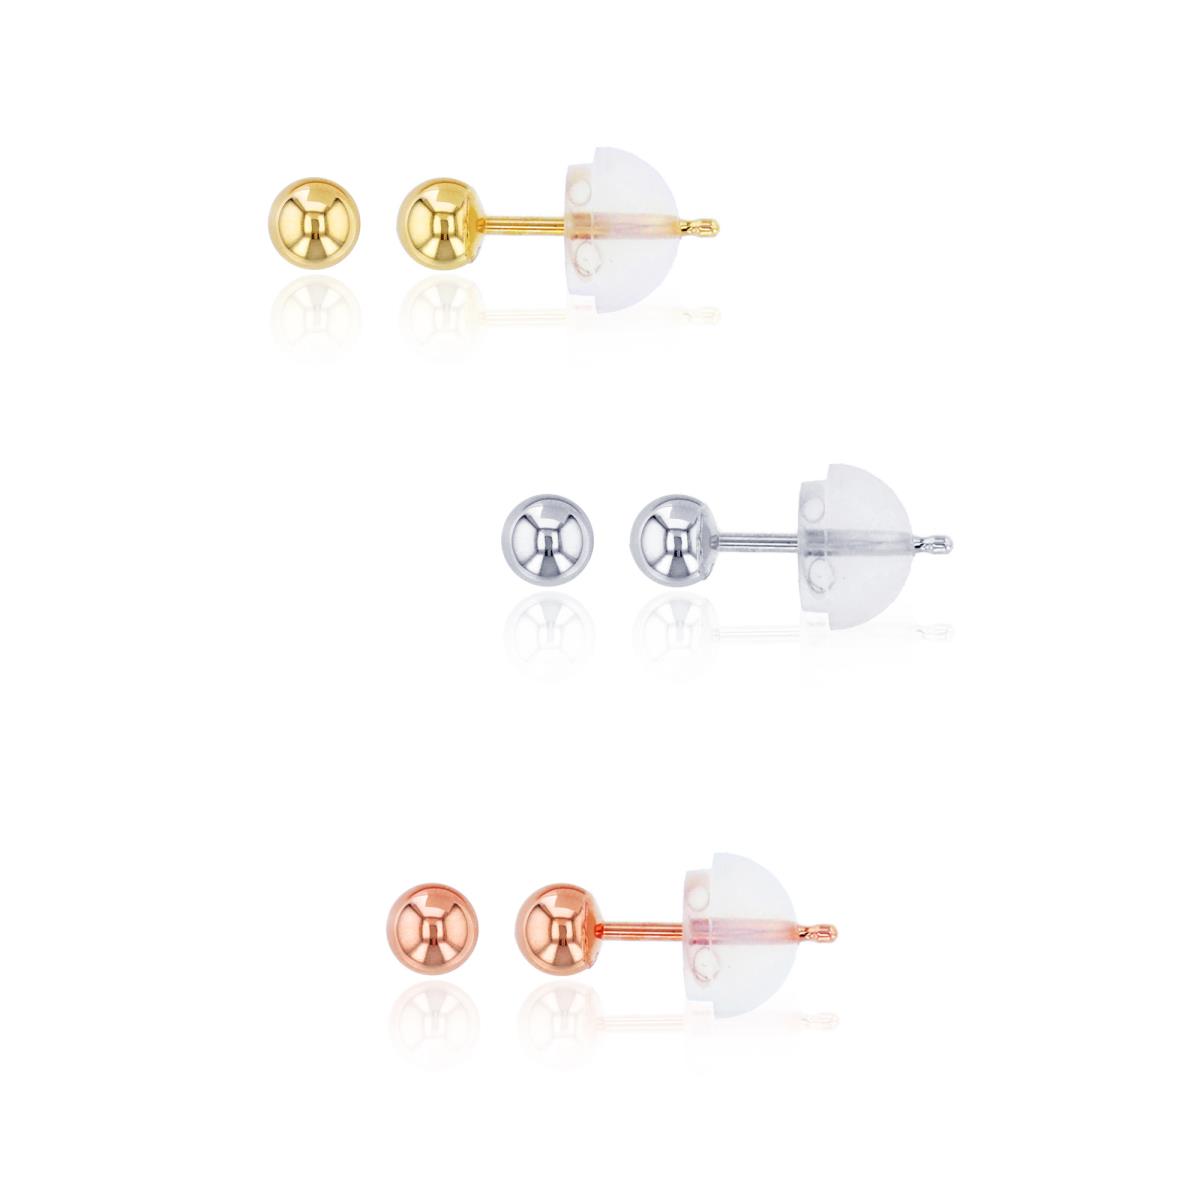 10K Gold Tricolor 3MM Ball Stud Earrings 3 Pack Set & 10K Silicone Back